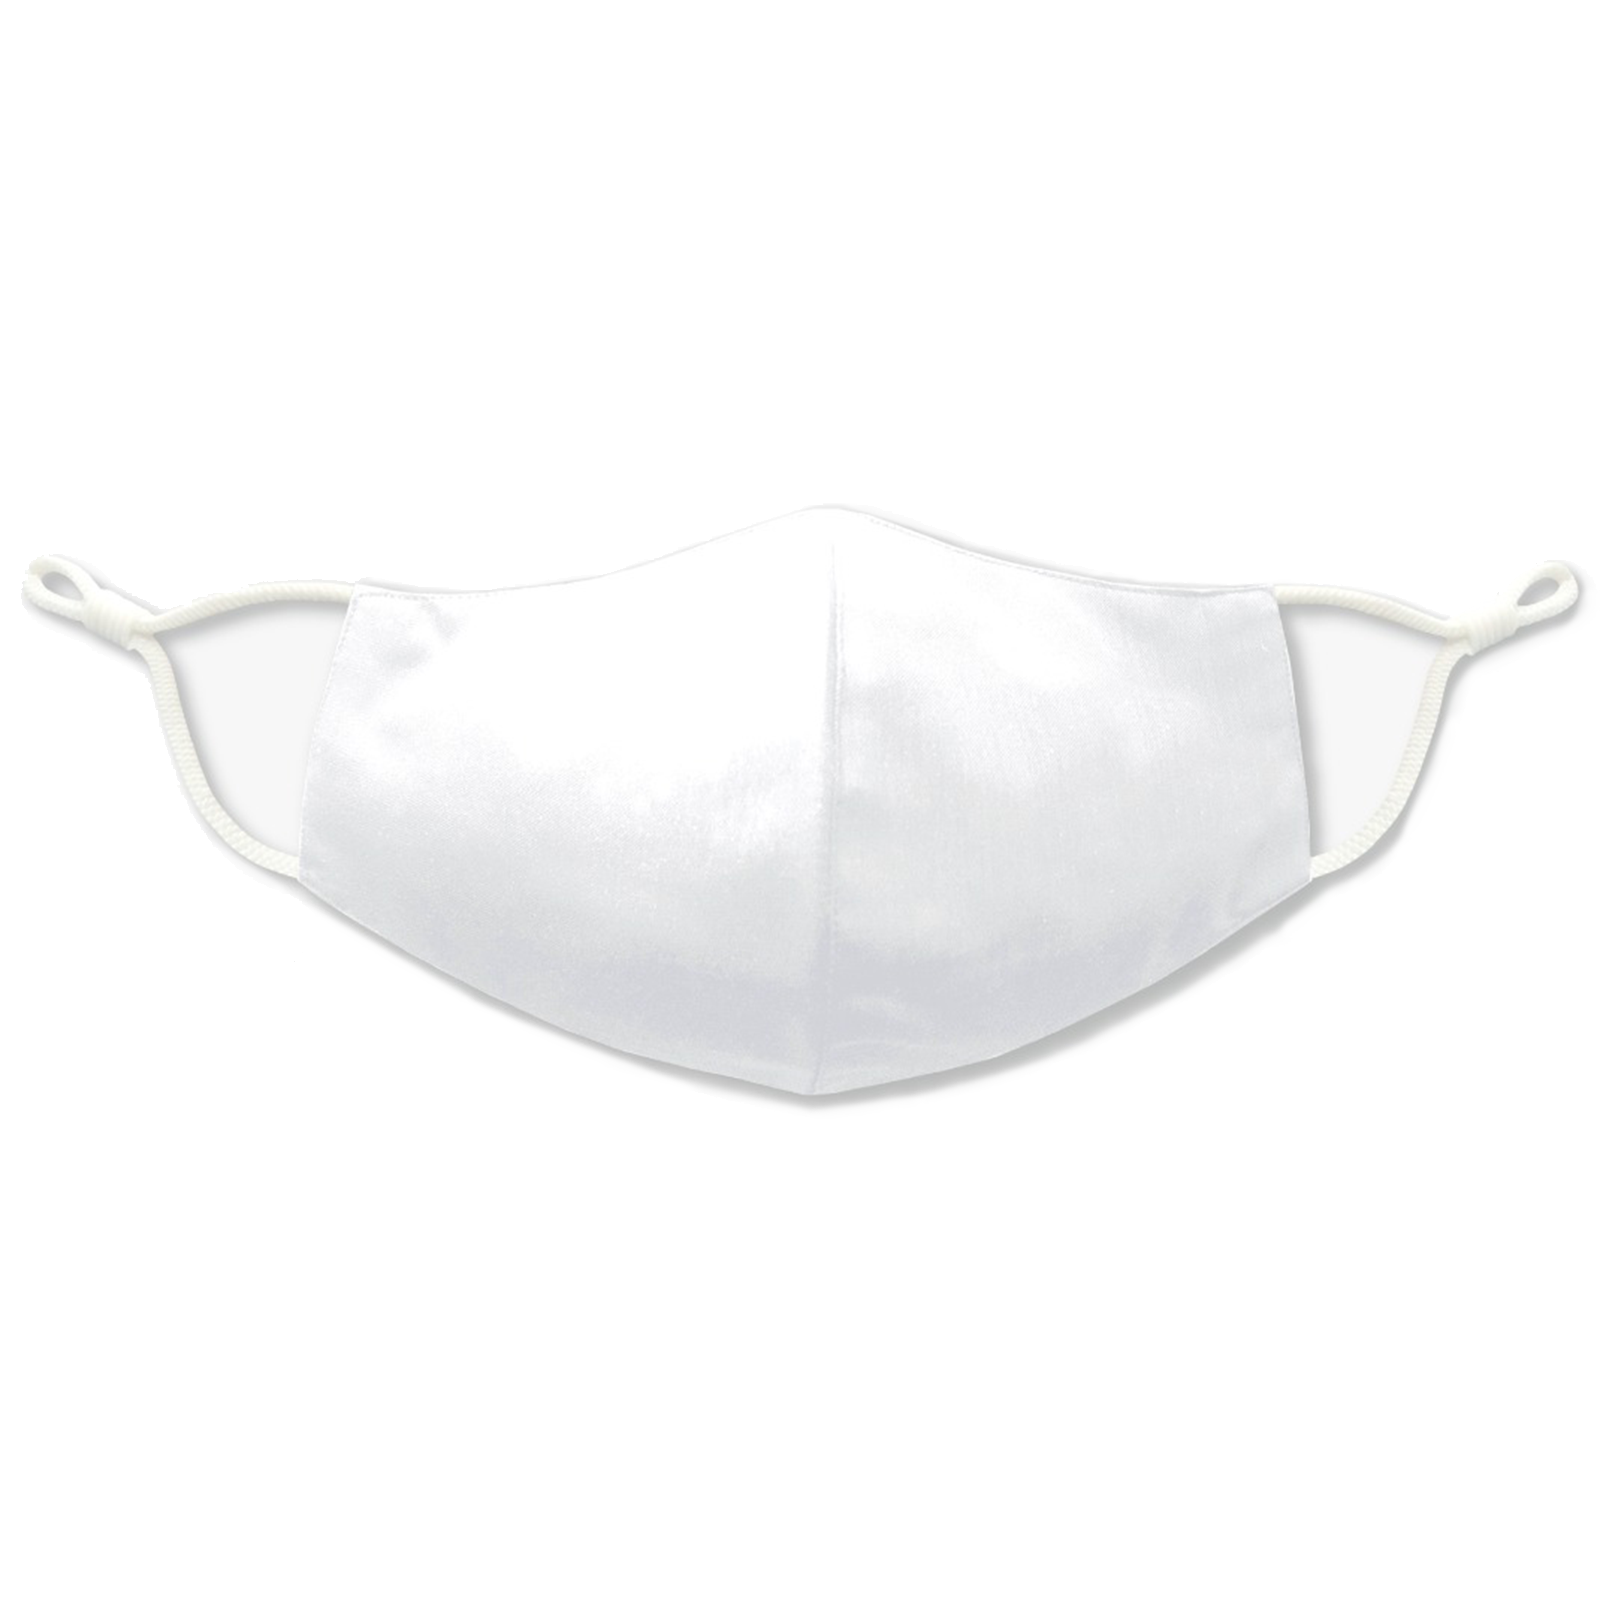 White Plain Mask with Grommets for Children and Teens